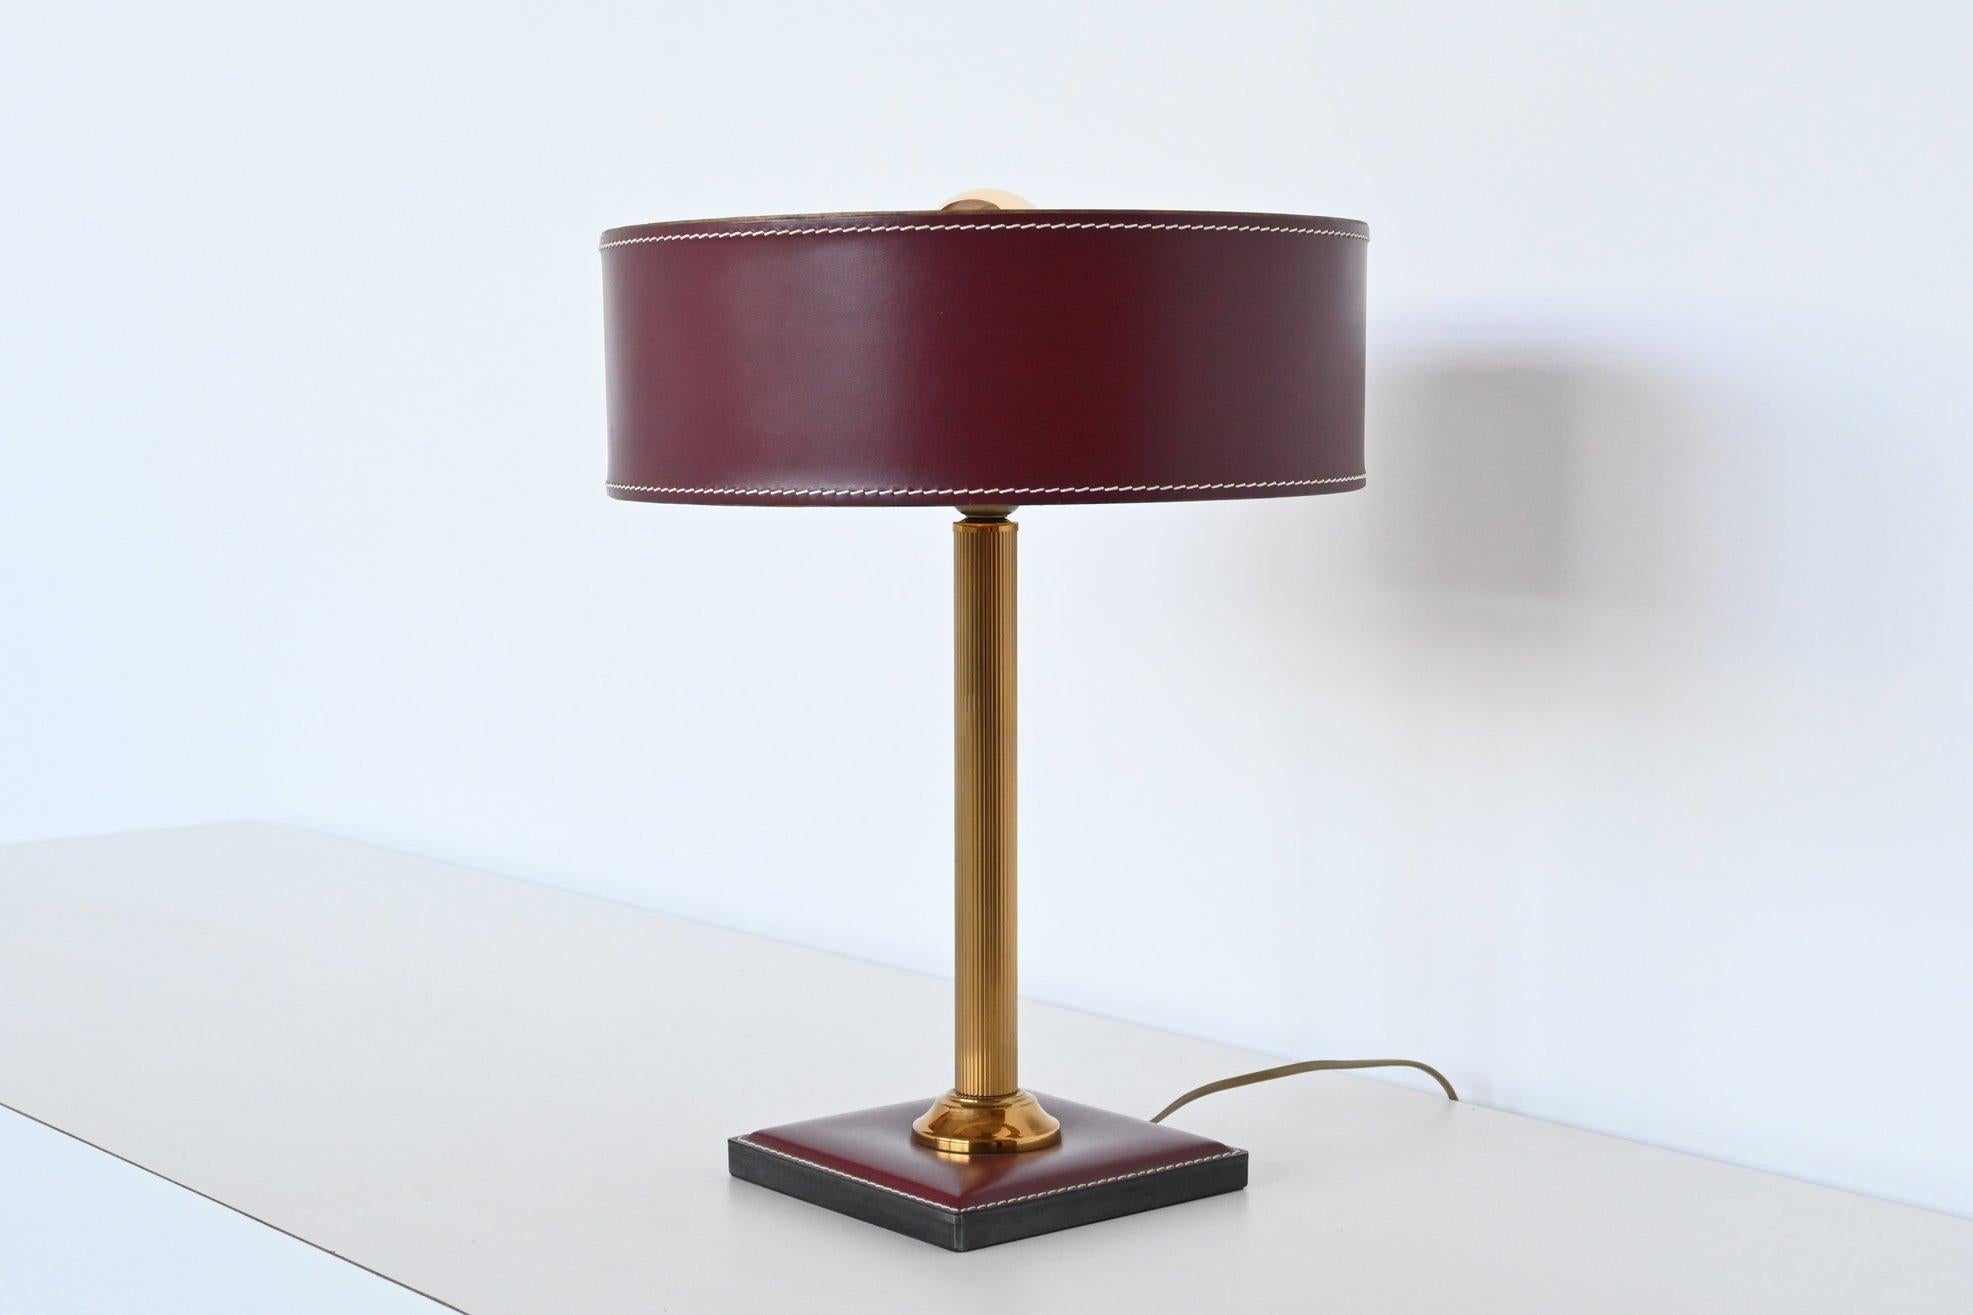 Very nice and highly decorative table lamp attributed by Jacques Adnet, France 1960. This leather clad table lamp has a square foot and a brass stem, the round shade is made of leather too. High quality stitching on this lamp. It is made in very